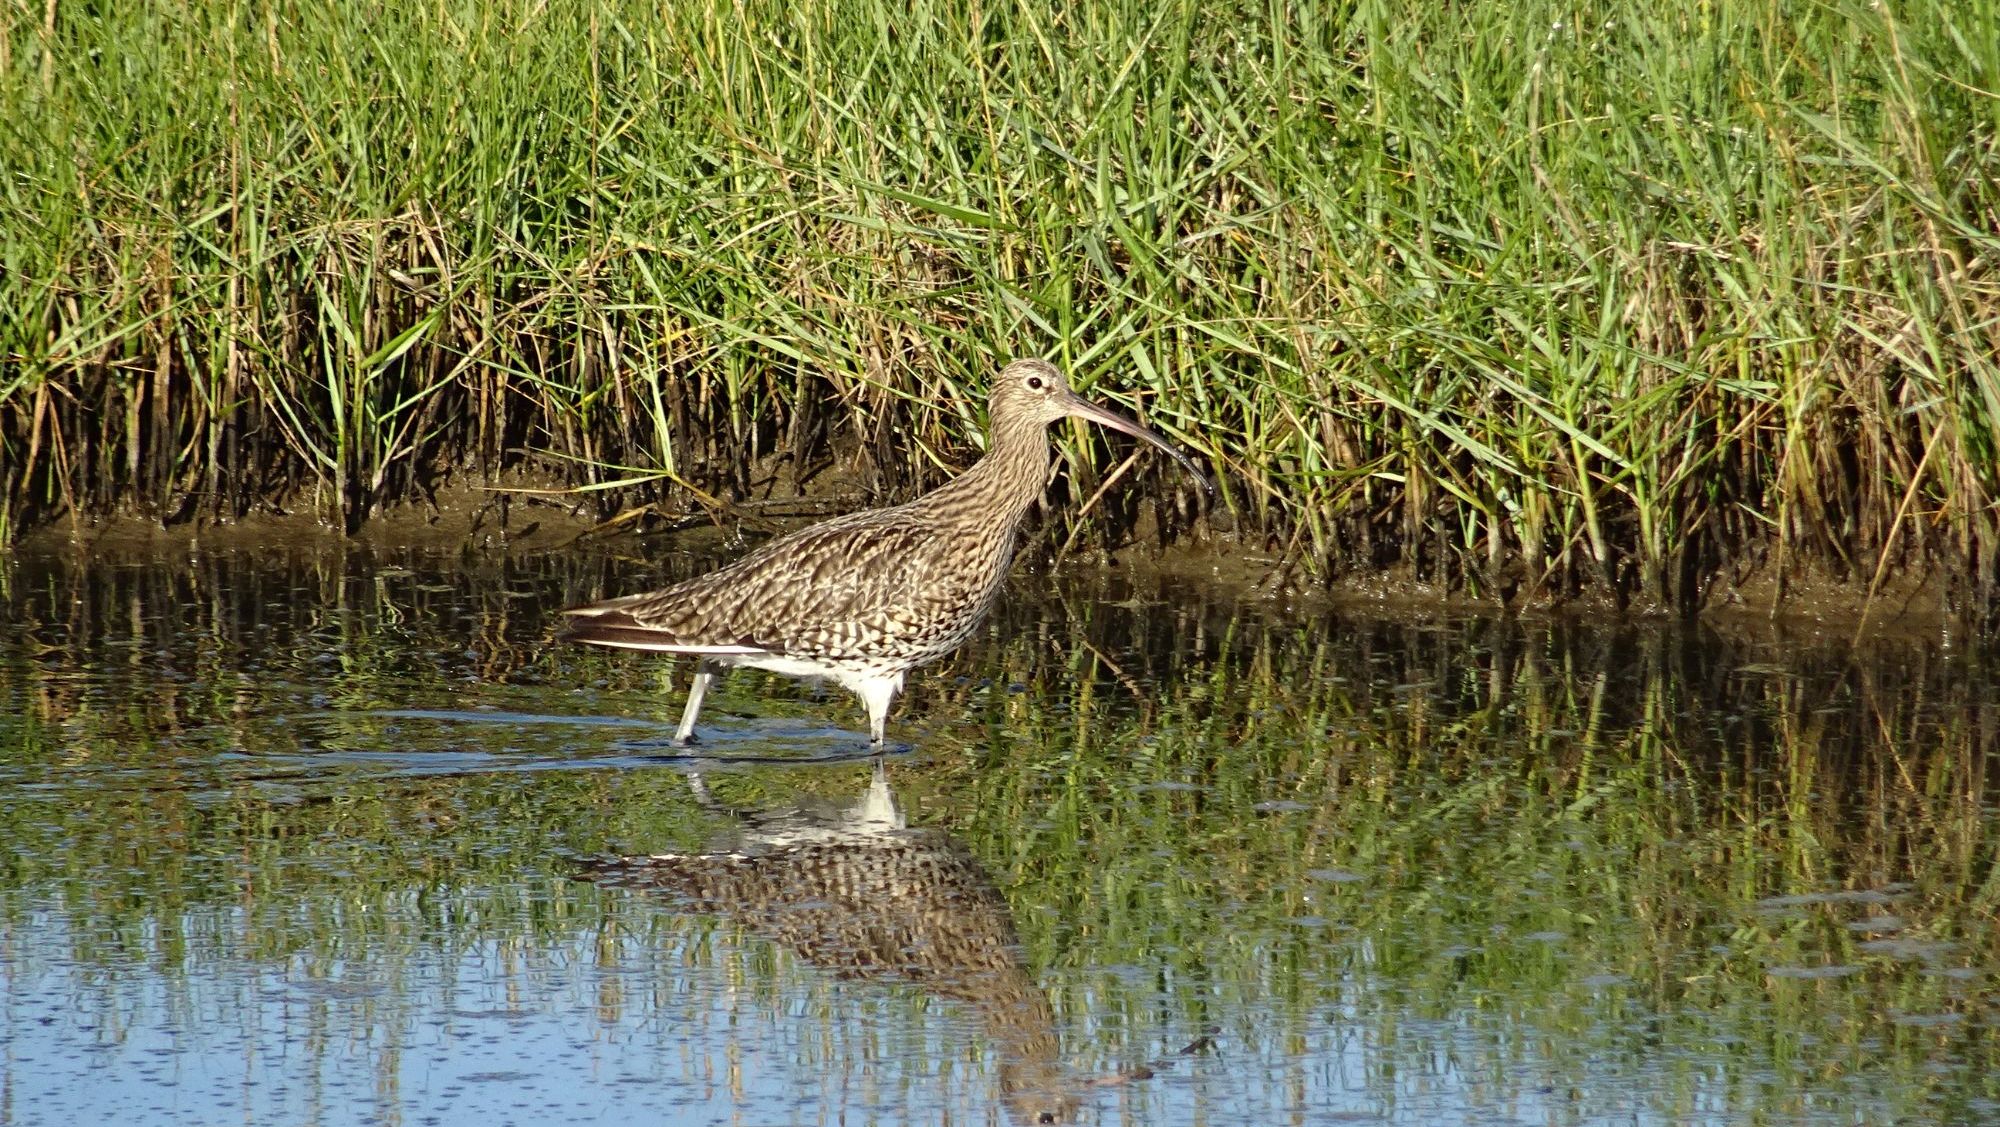 A curlew wading through a salt marsh pool in front of reeds on the Lune Estuary